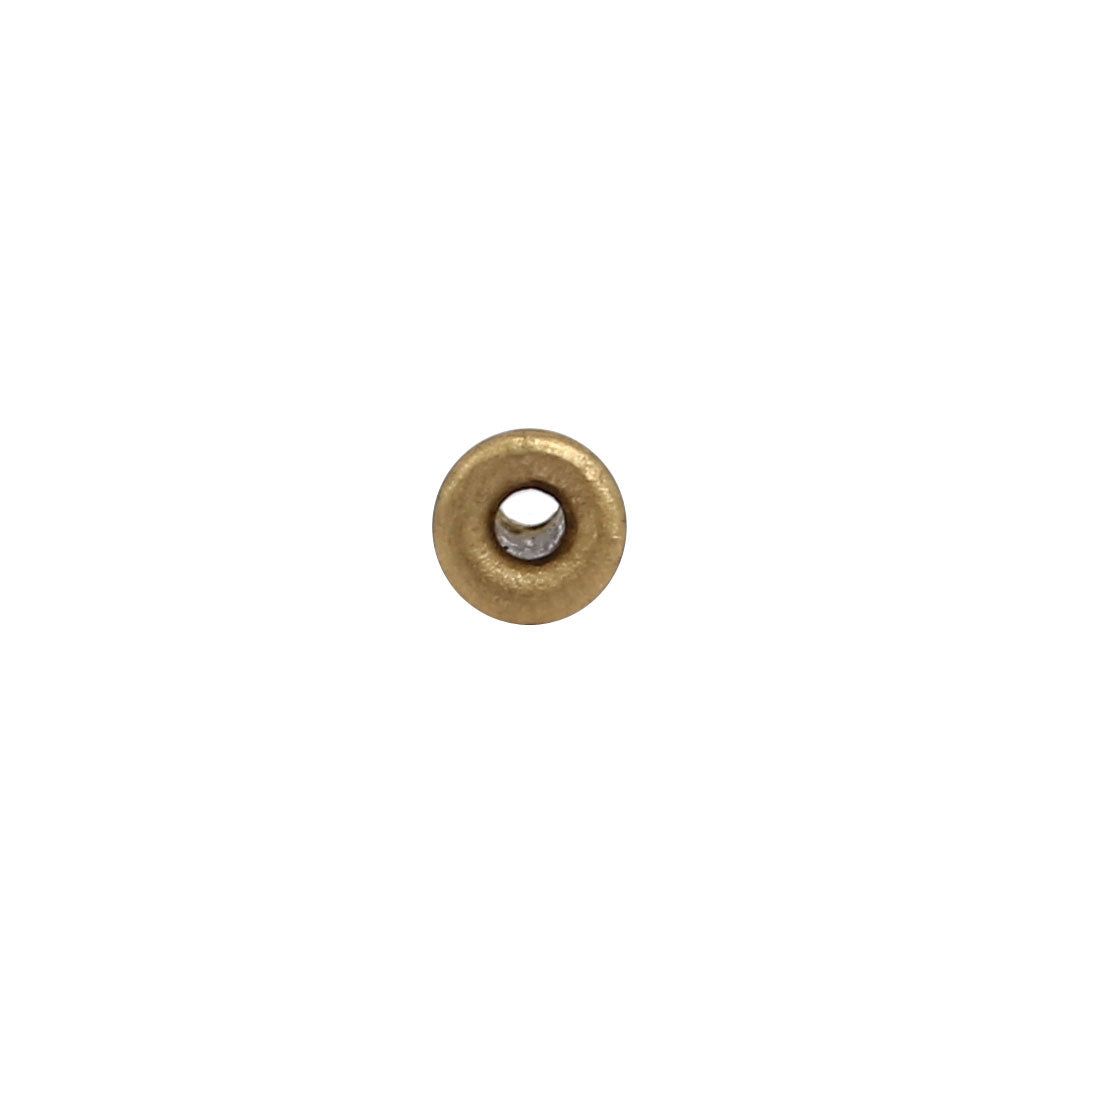 uxcell Uxcell 100pcs M2x5mm Brass Plated Metal Hollow Eyelets Rivets Gold Tone